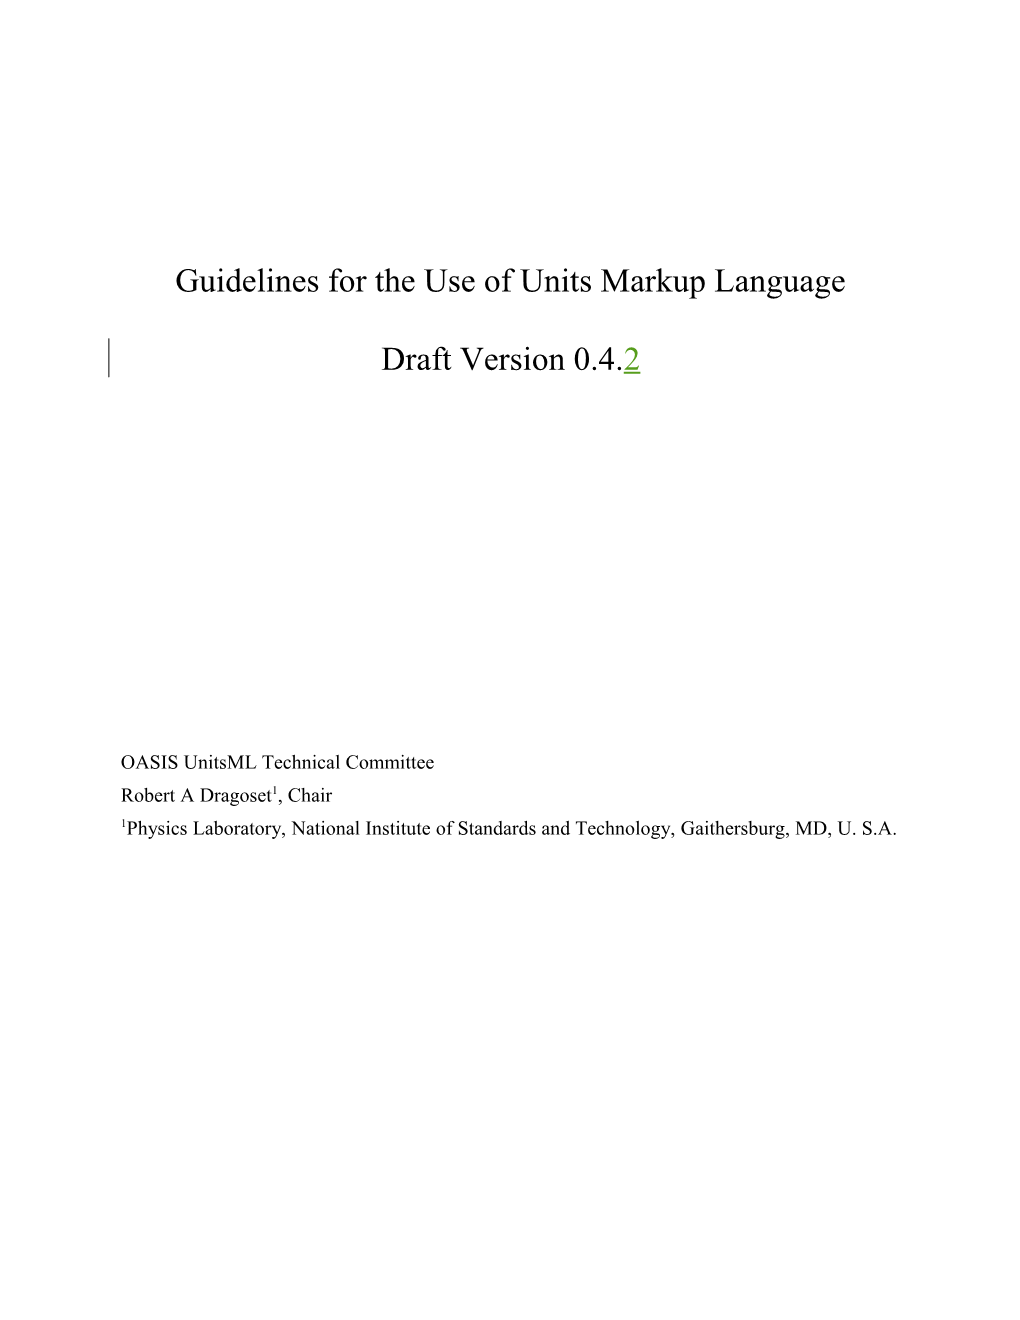 Guidelines for the Use of Units Markup Languagedraft Version 0.4.2